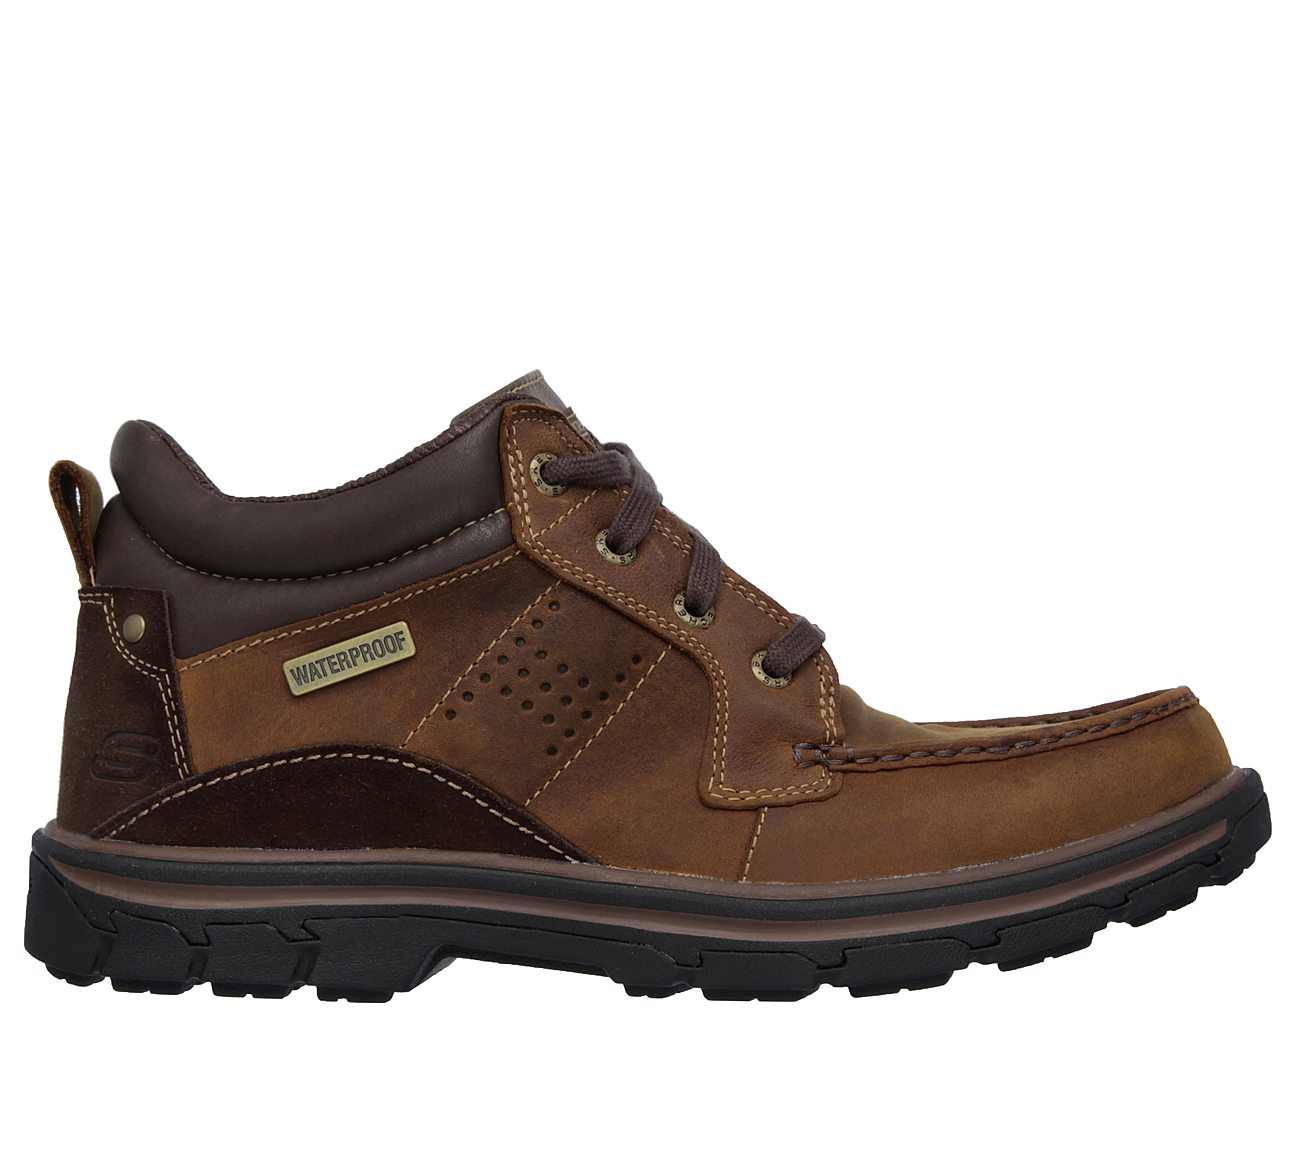 Melego SKECHERS Relaxed Fit Shoes